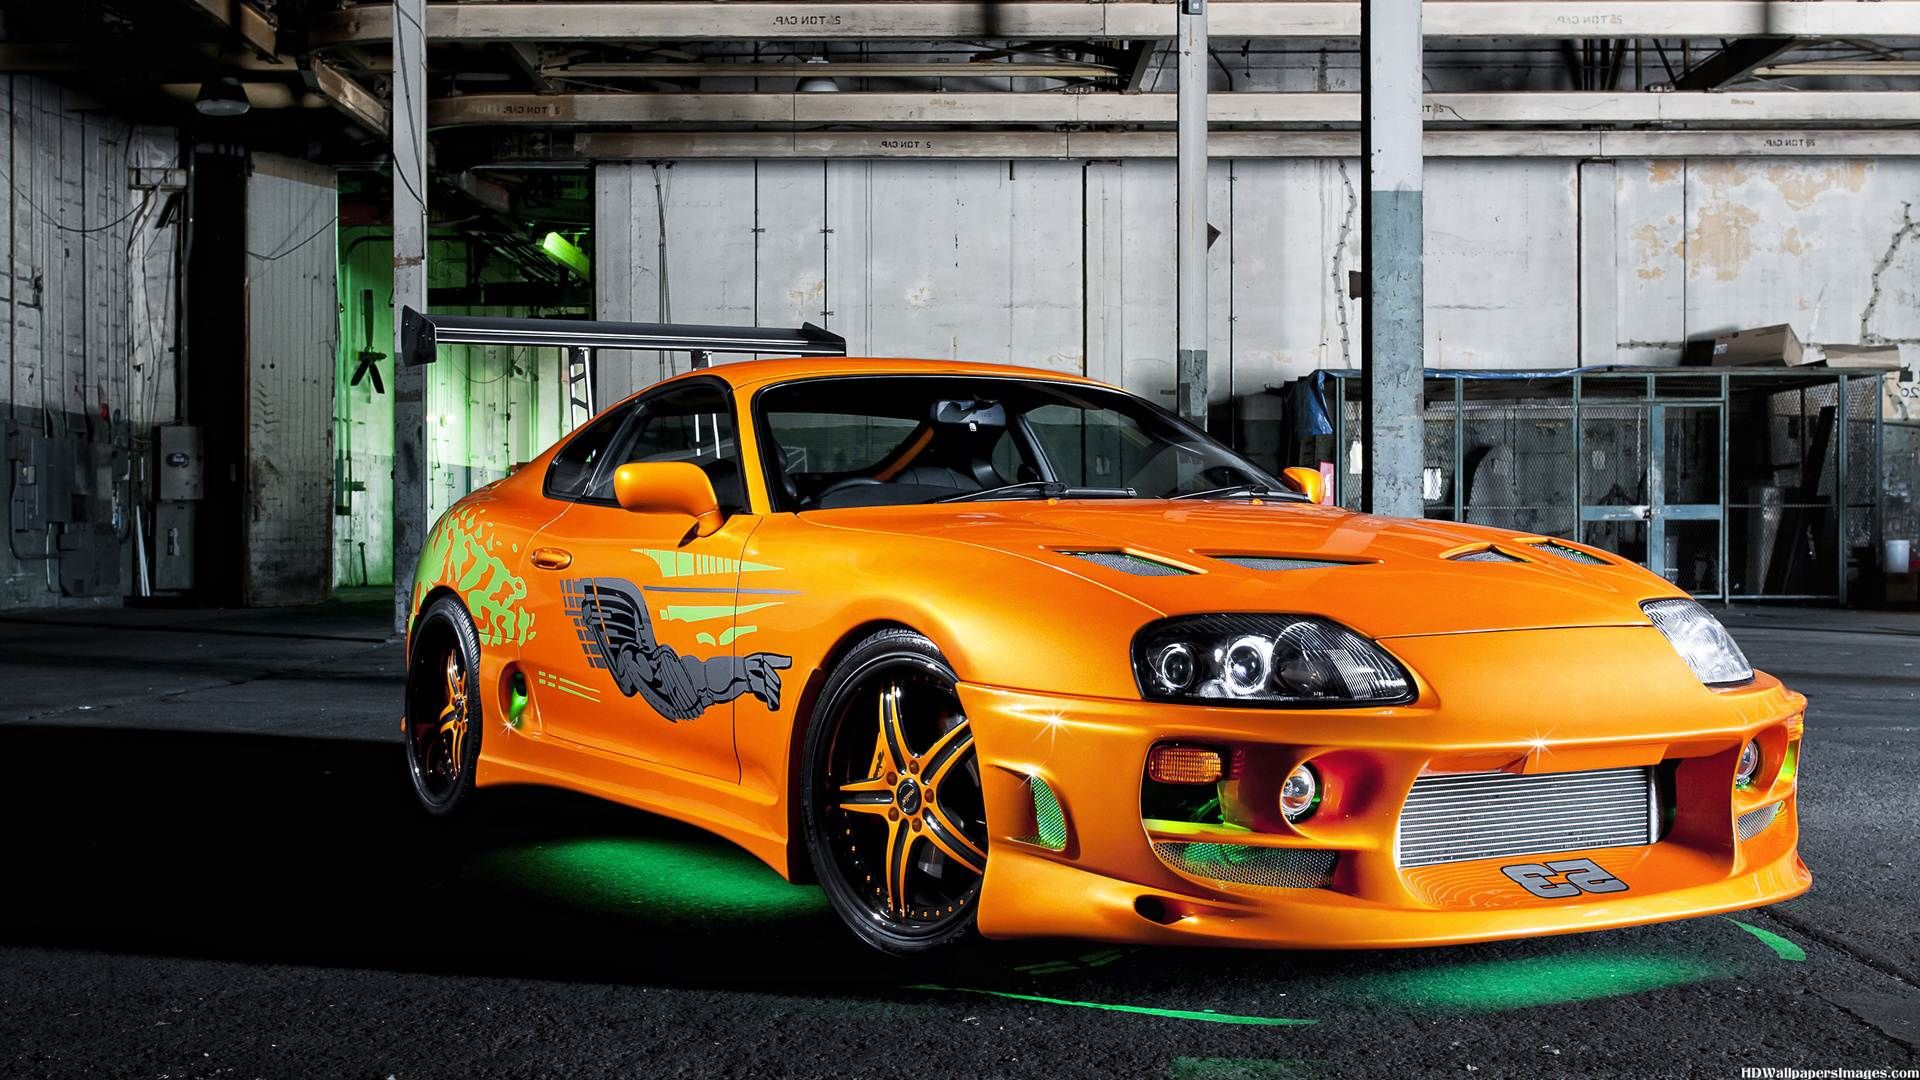 Toyota Supra Fast And Furious HD Wallpaper   4T4ORG